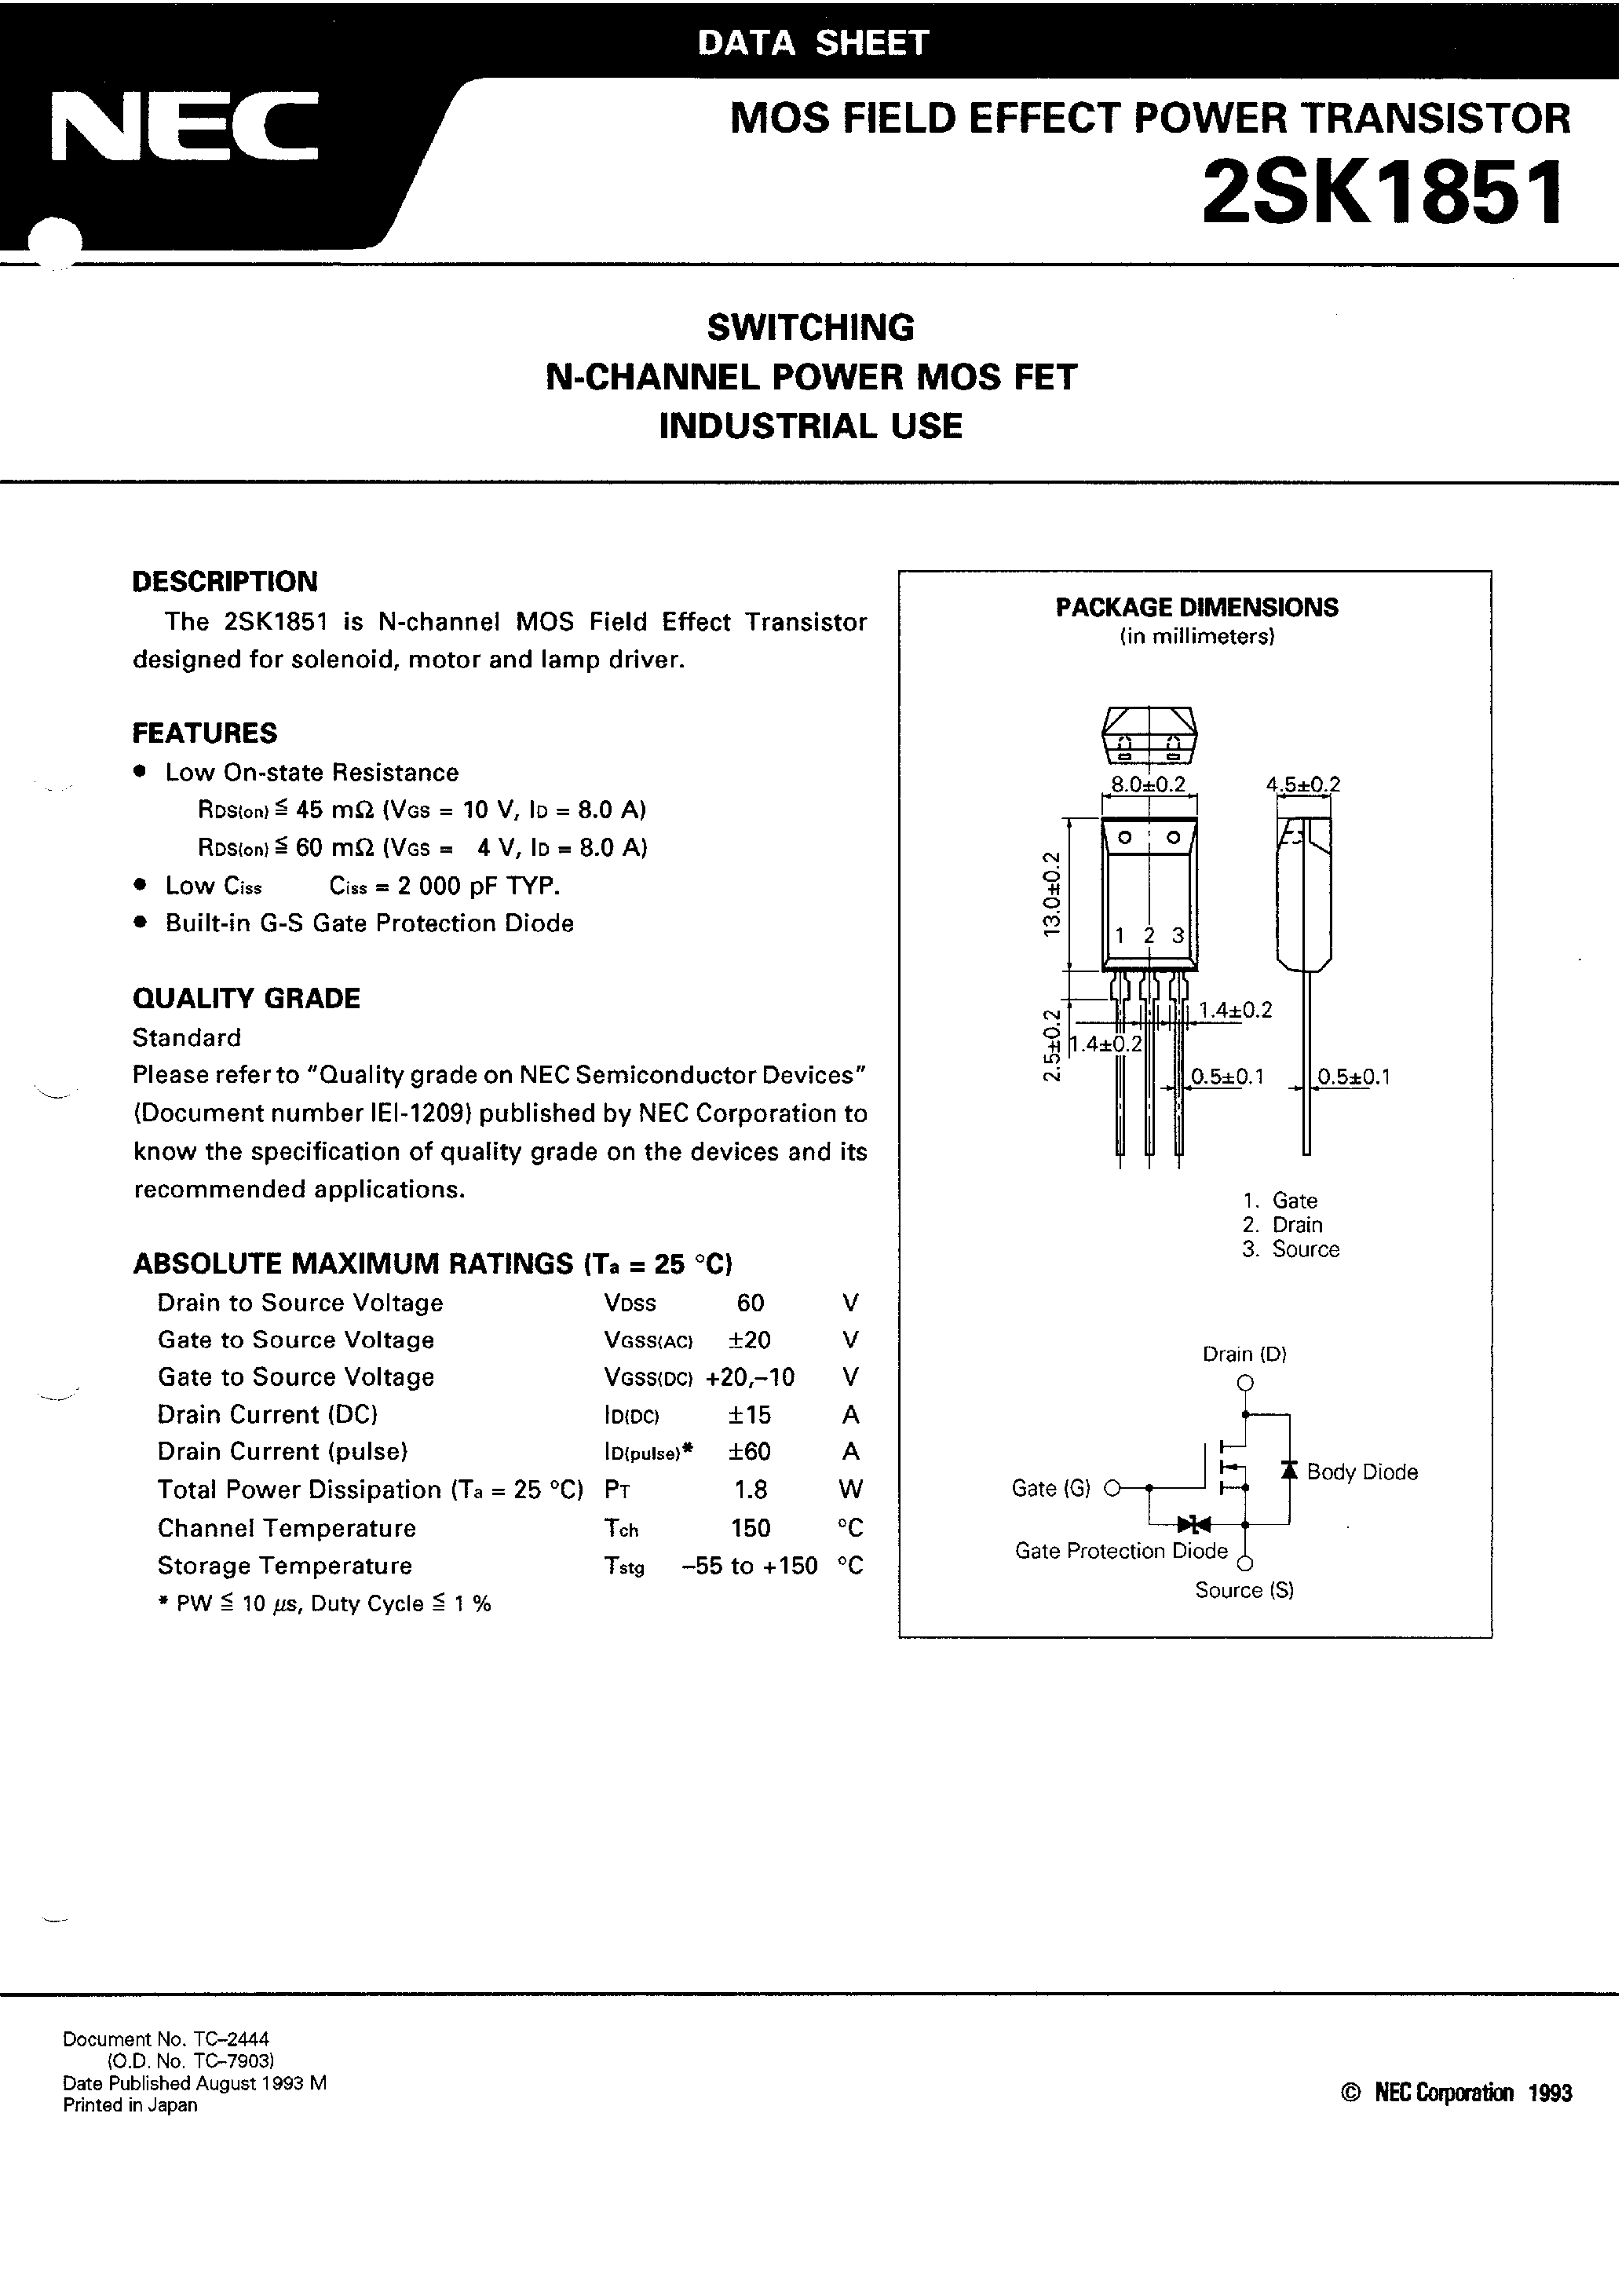 Datasheet K1851 - Search -----> 2SK1851 page 1